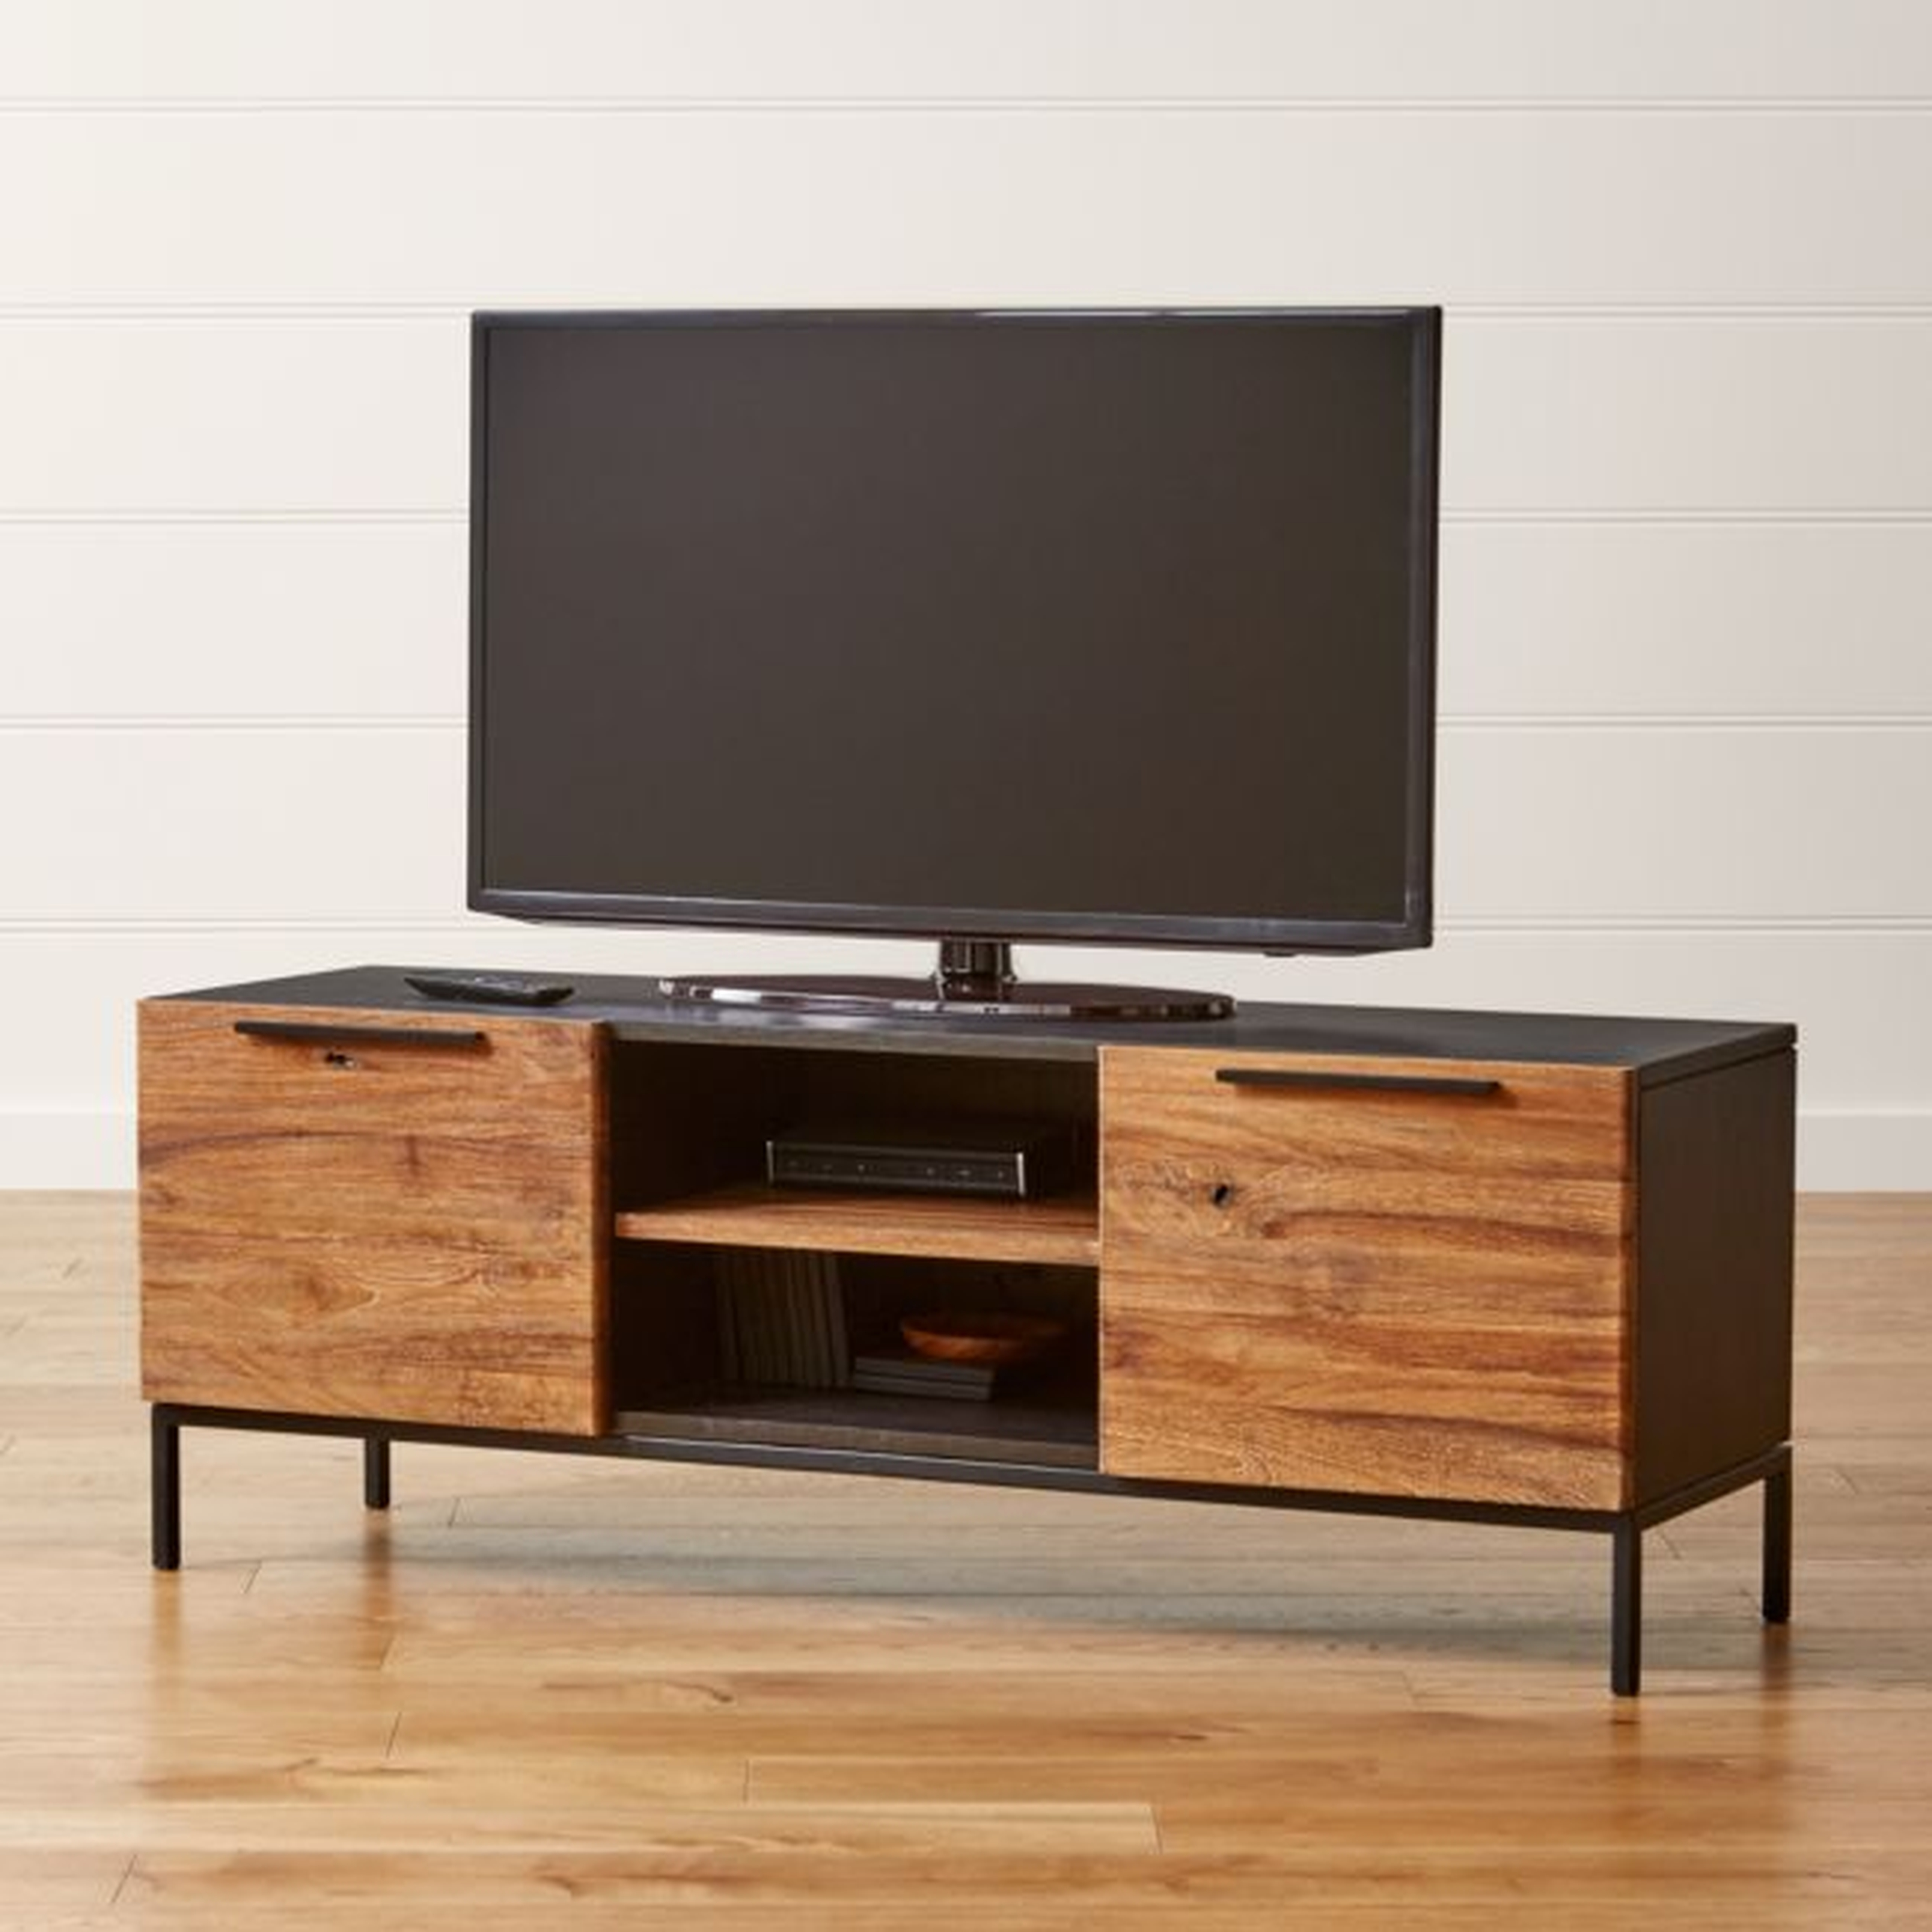 Rigby Natural 55" Small Media Console with Base - Crate and Barrel